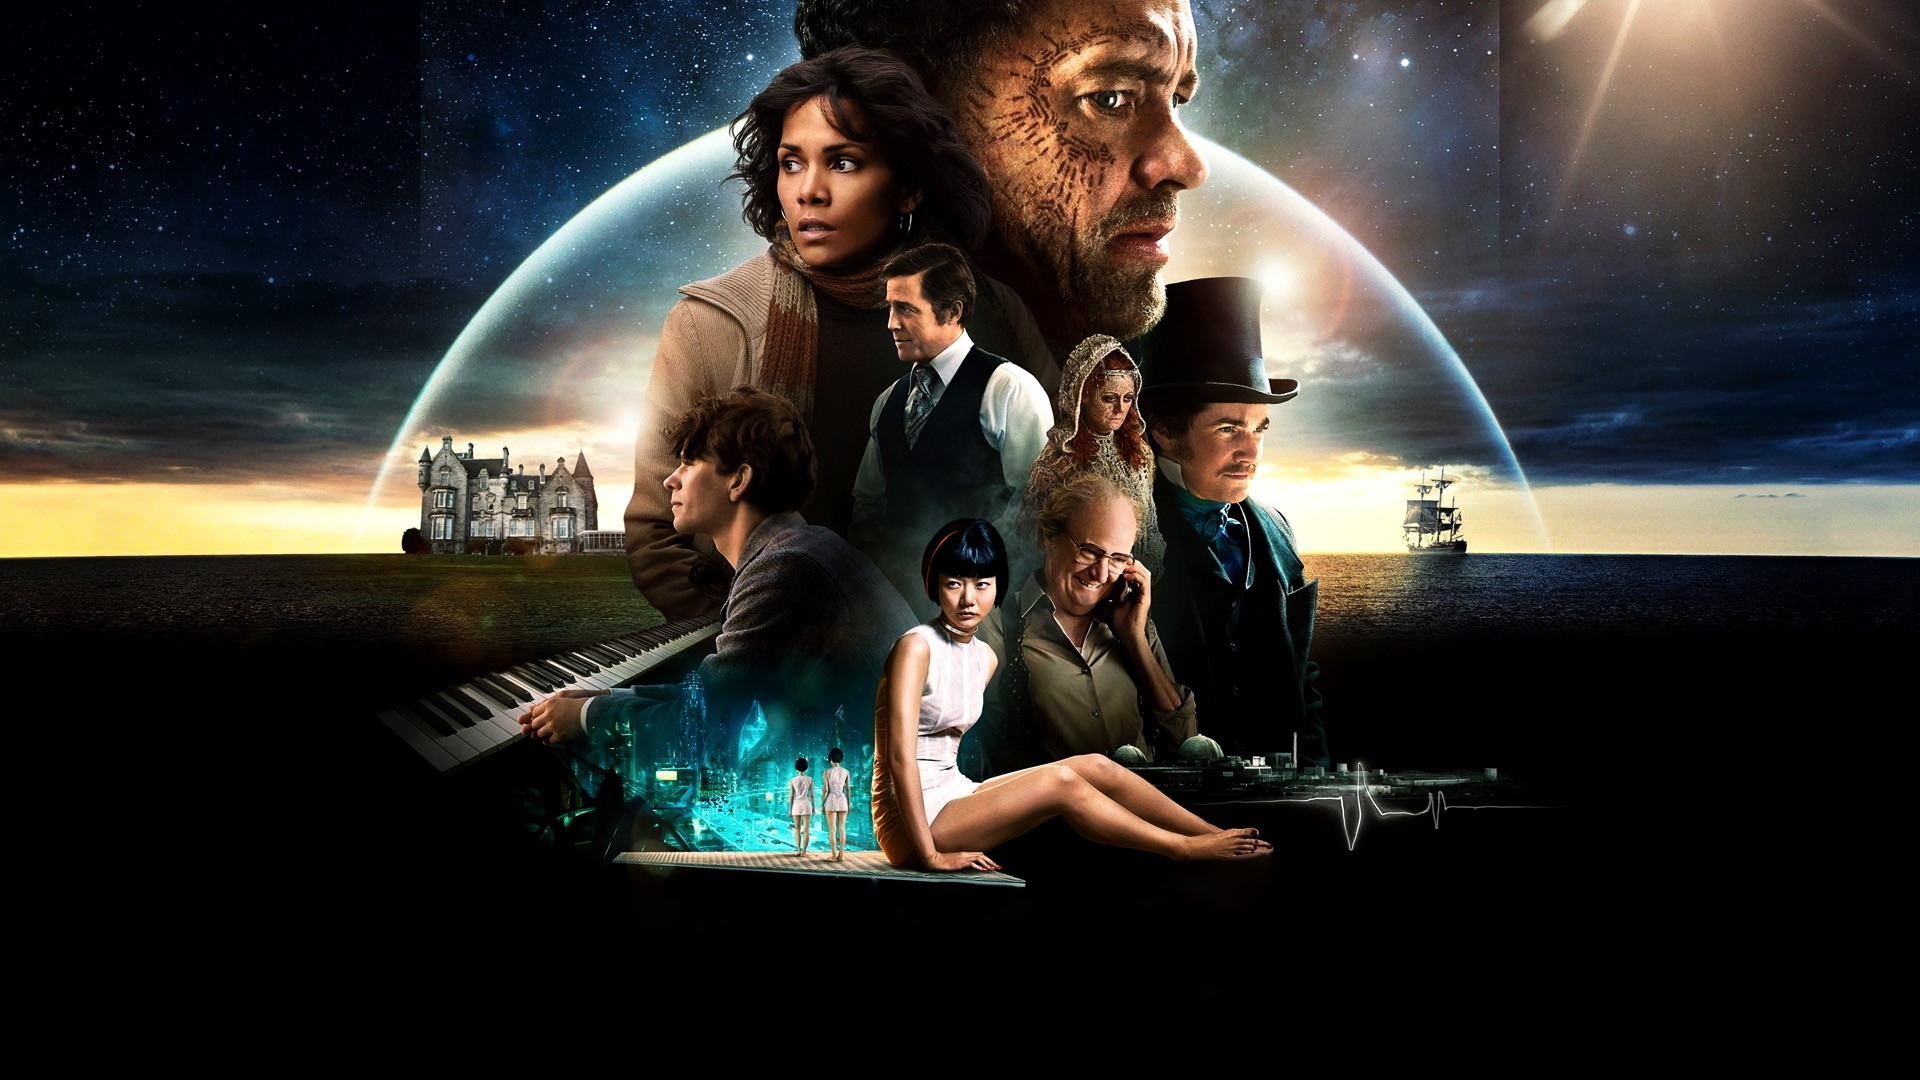 Cloud Atlas: a movie that connects the drops.